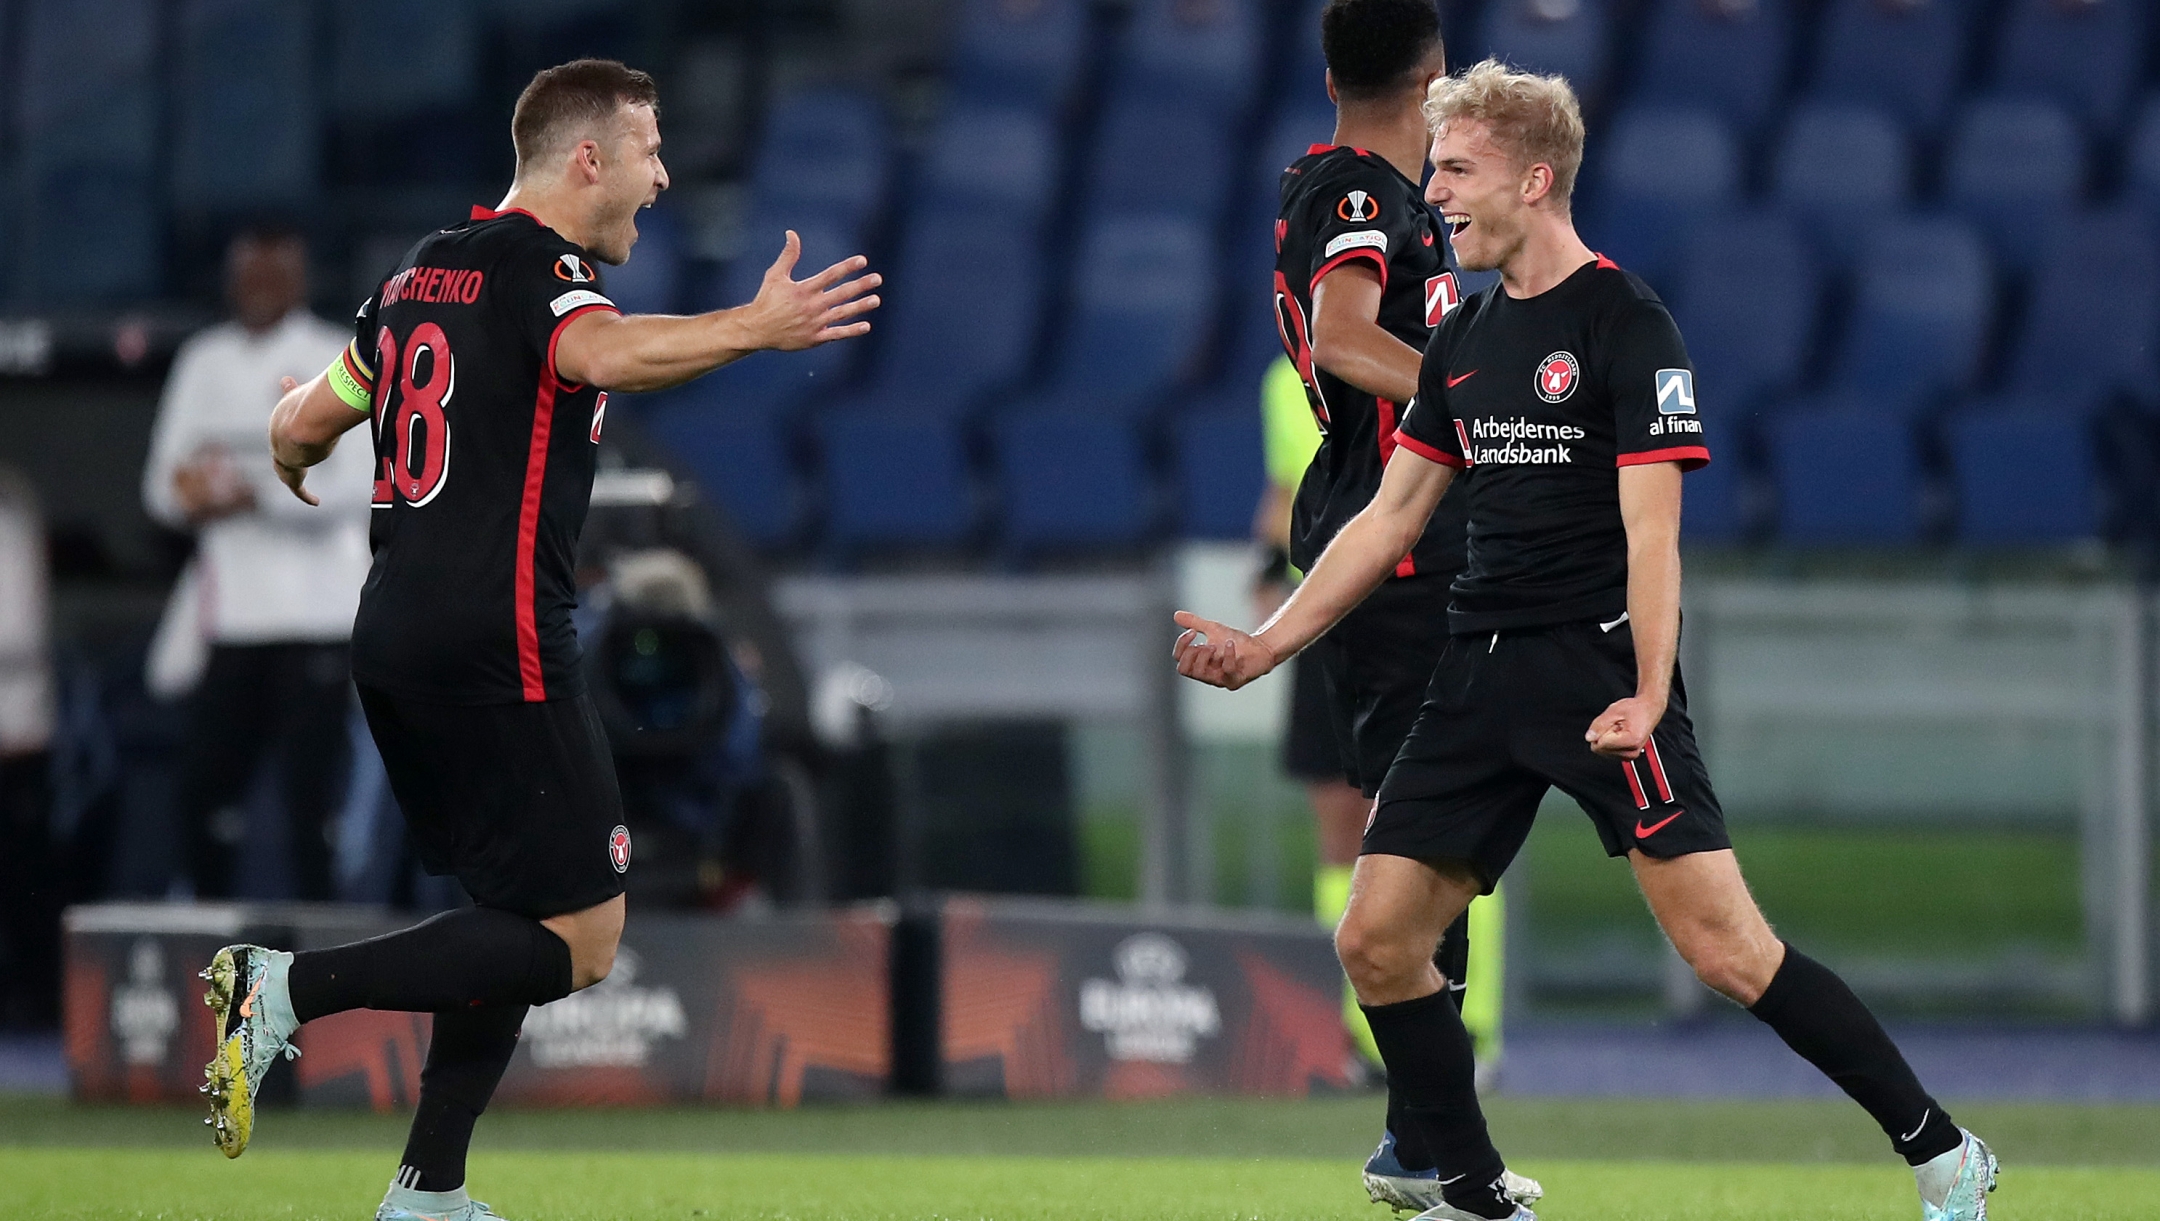 ROME, ITALY - OCTOBER 27: Gustav Isaksen of FC Midtjylland celebrates after scoring their side's first goal during the UEFA Europa League group F match between SS Lazio and FC Midtjylland at Stadio Olimpico on October 27, 2022 in Rome, Italy. (Photo by Paolo Bruno/Getty Images)